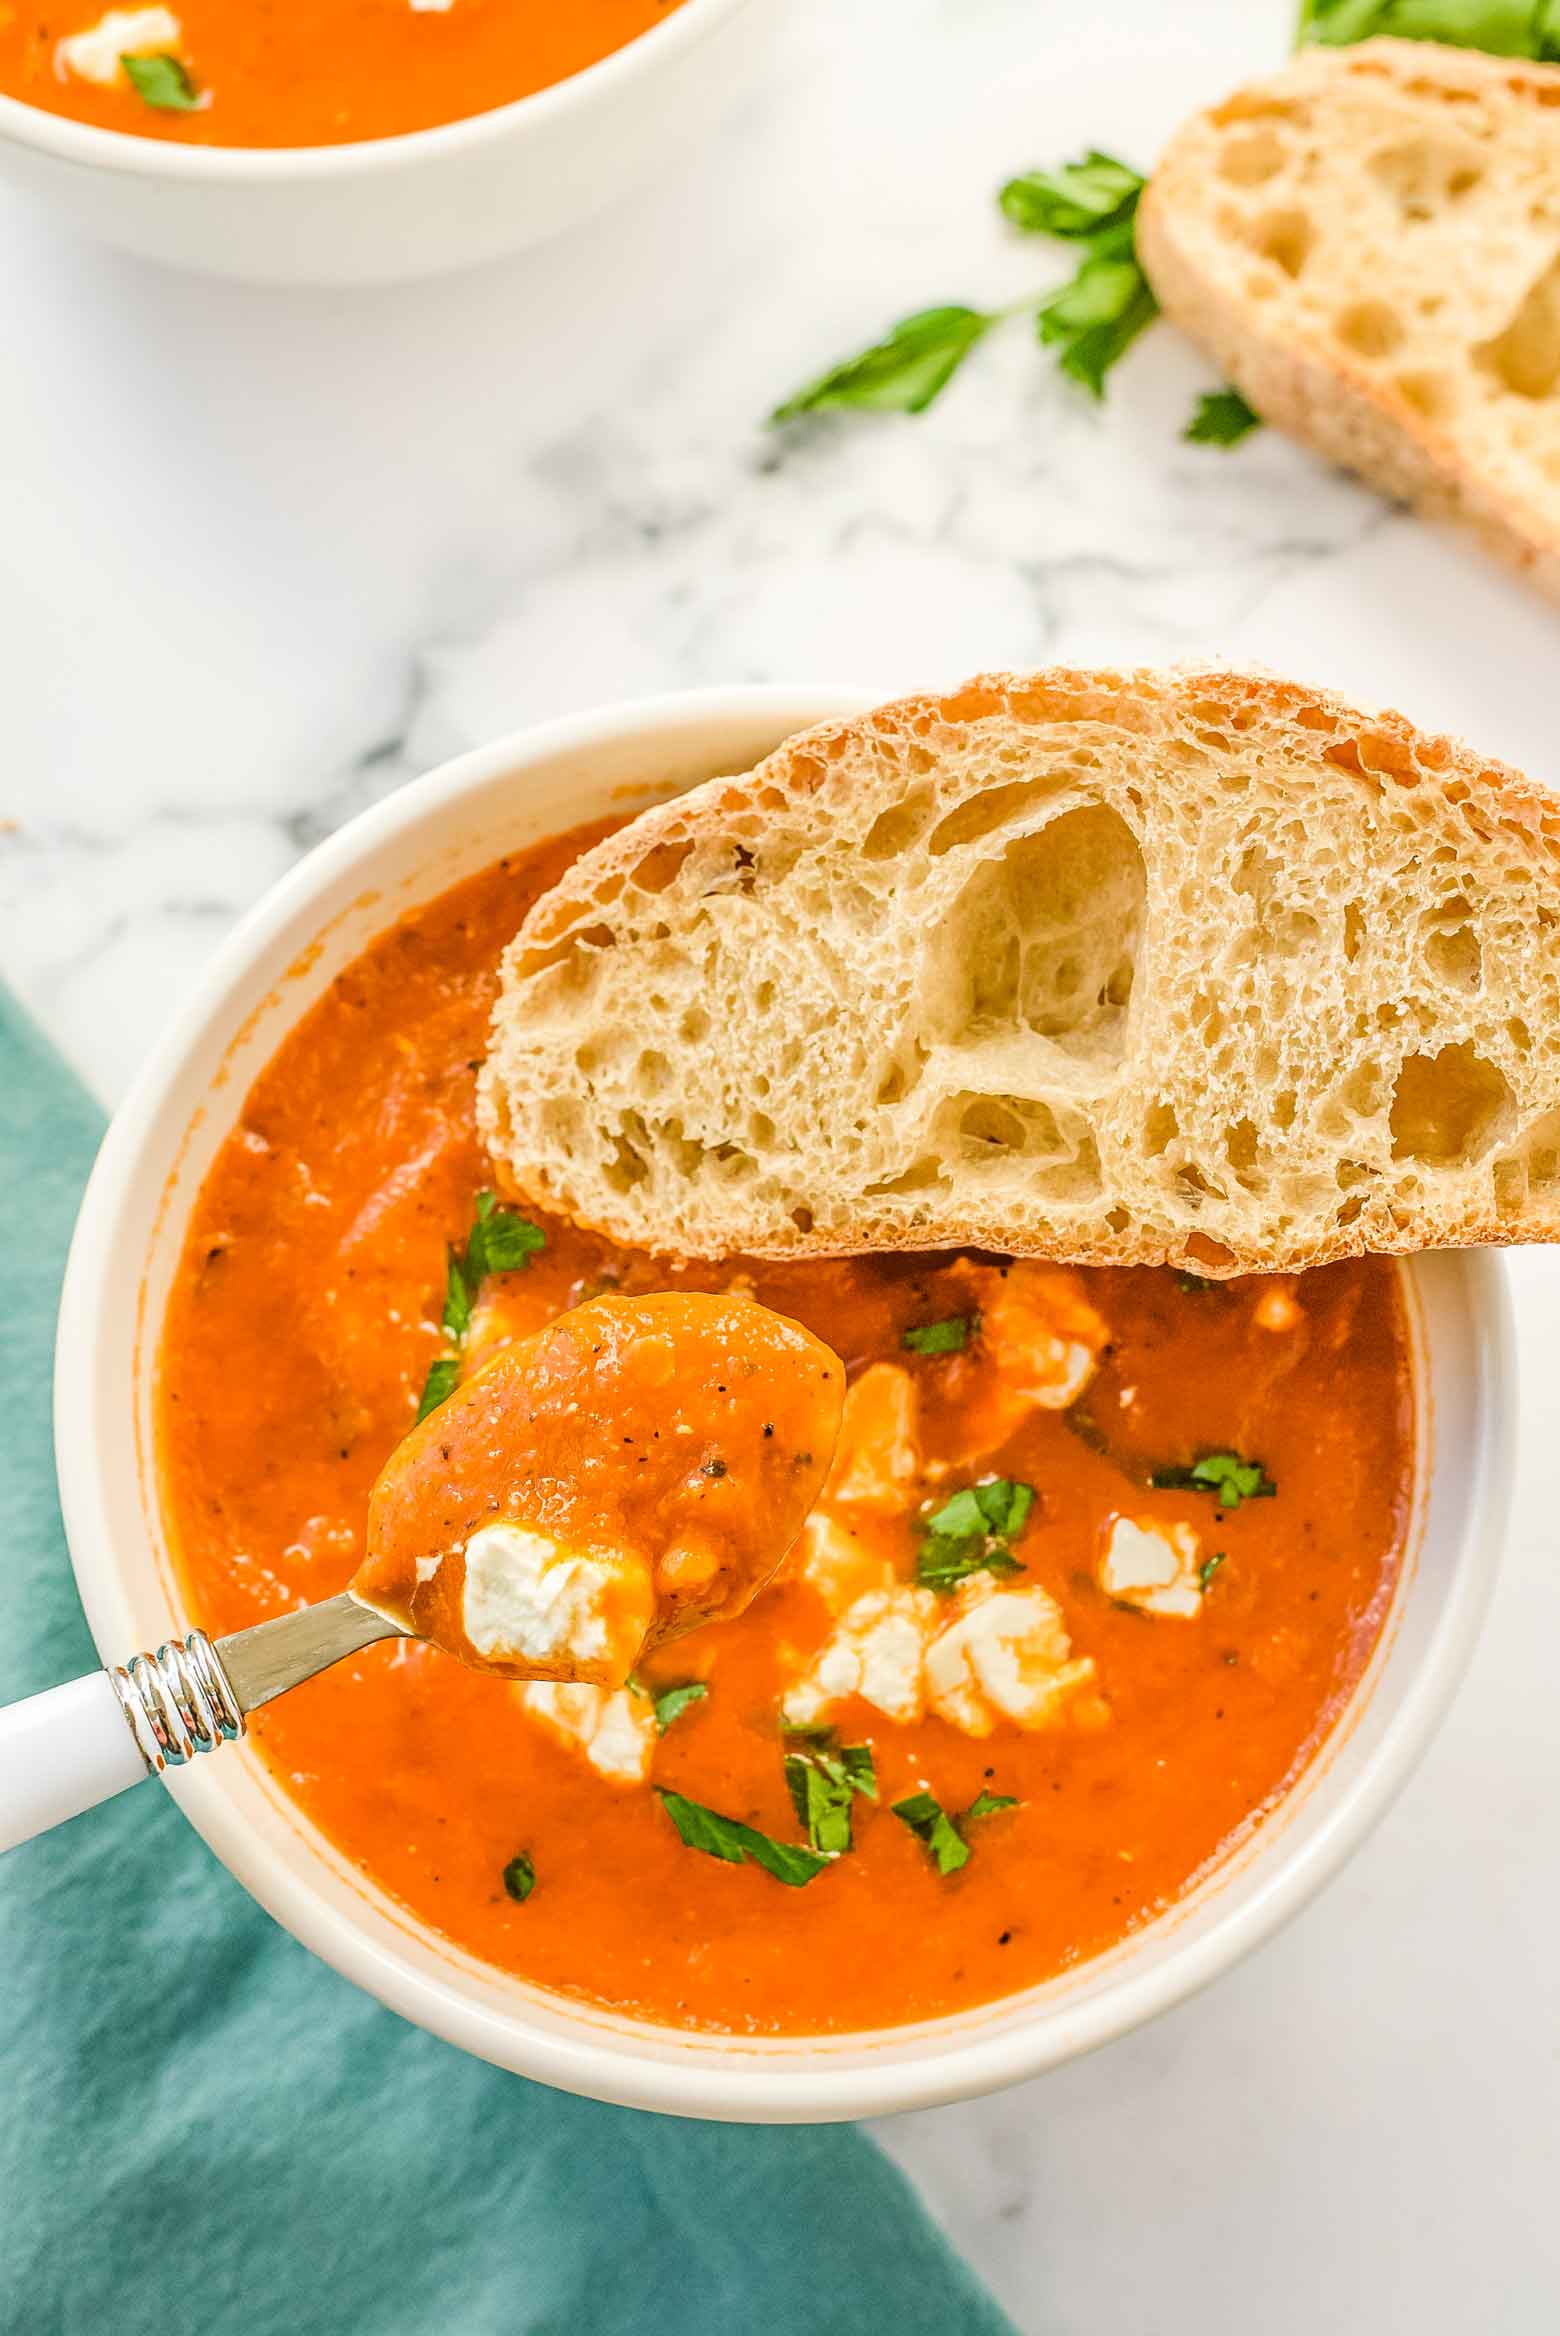 A spoon of soup with cheese and herbs above a full white bowl with a side of french bread